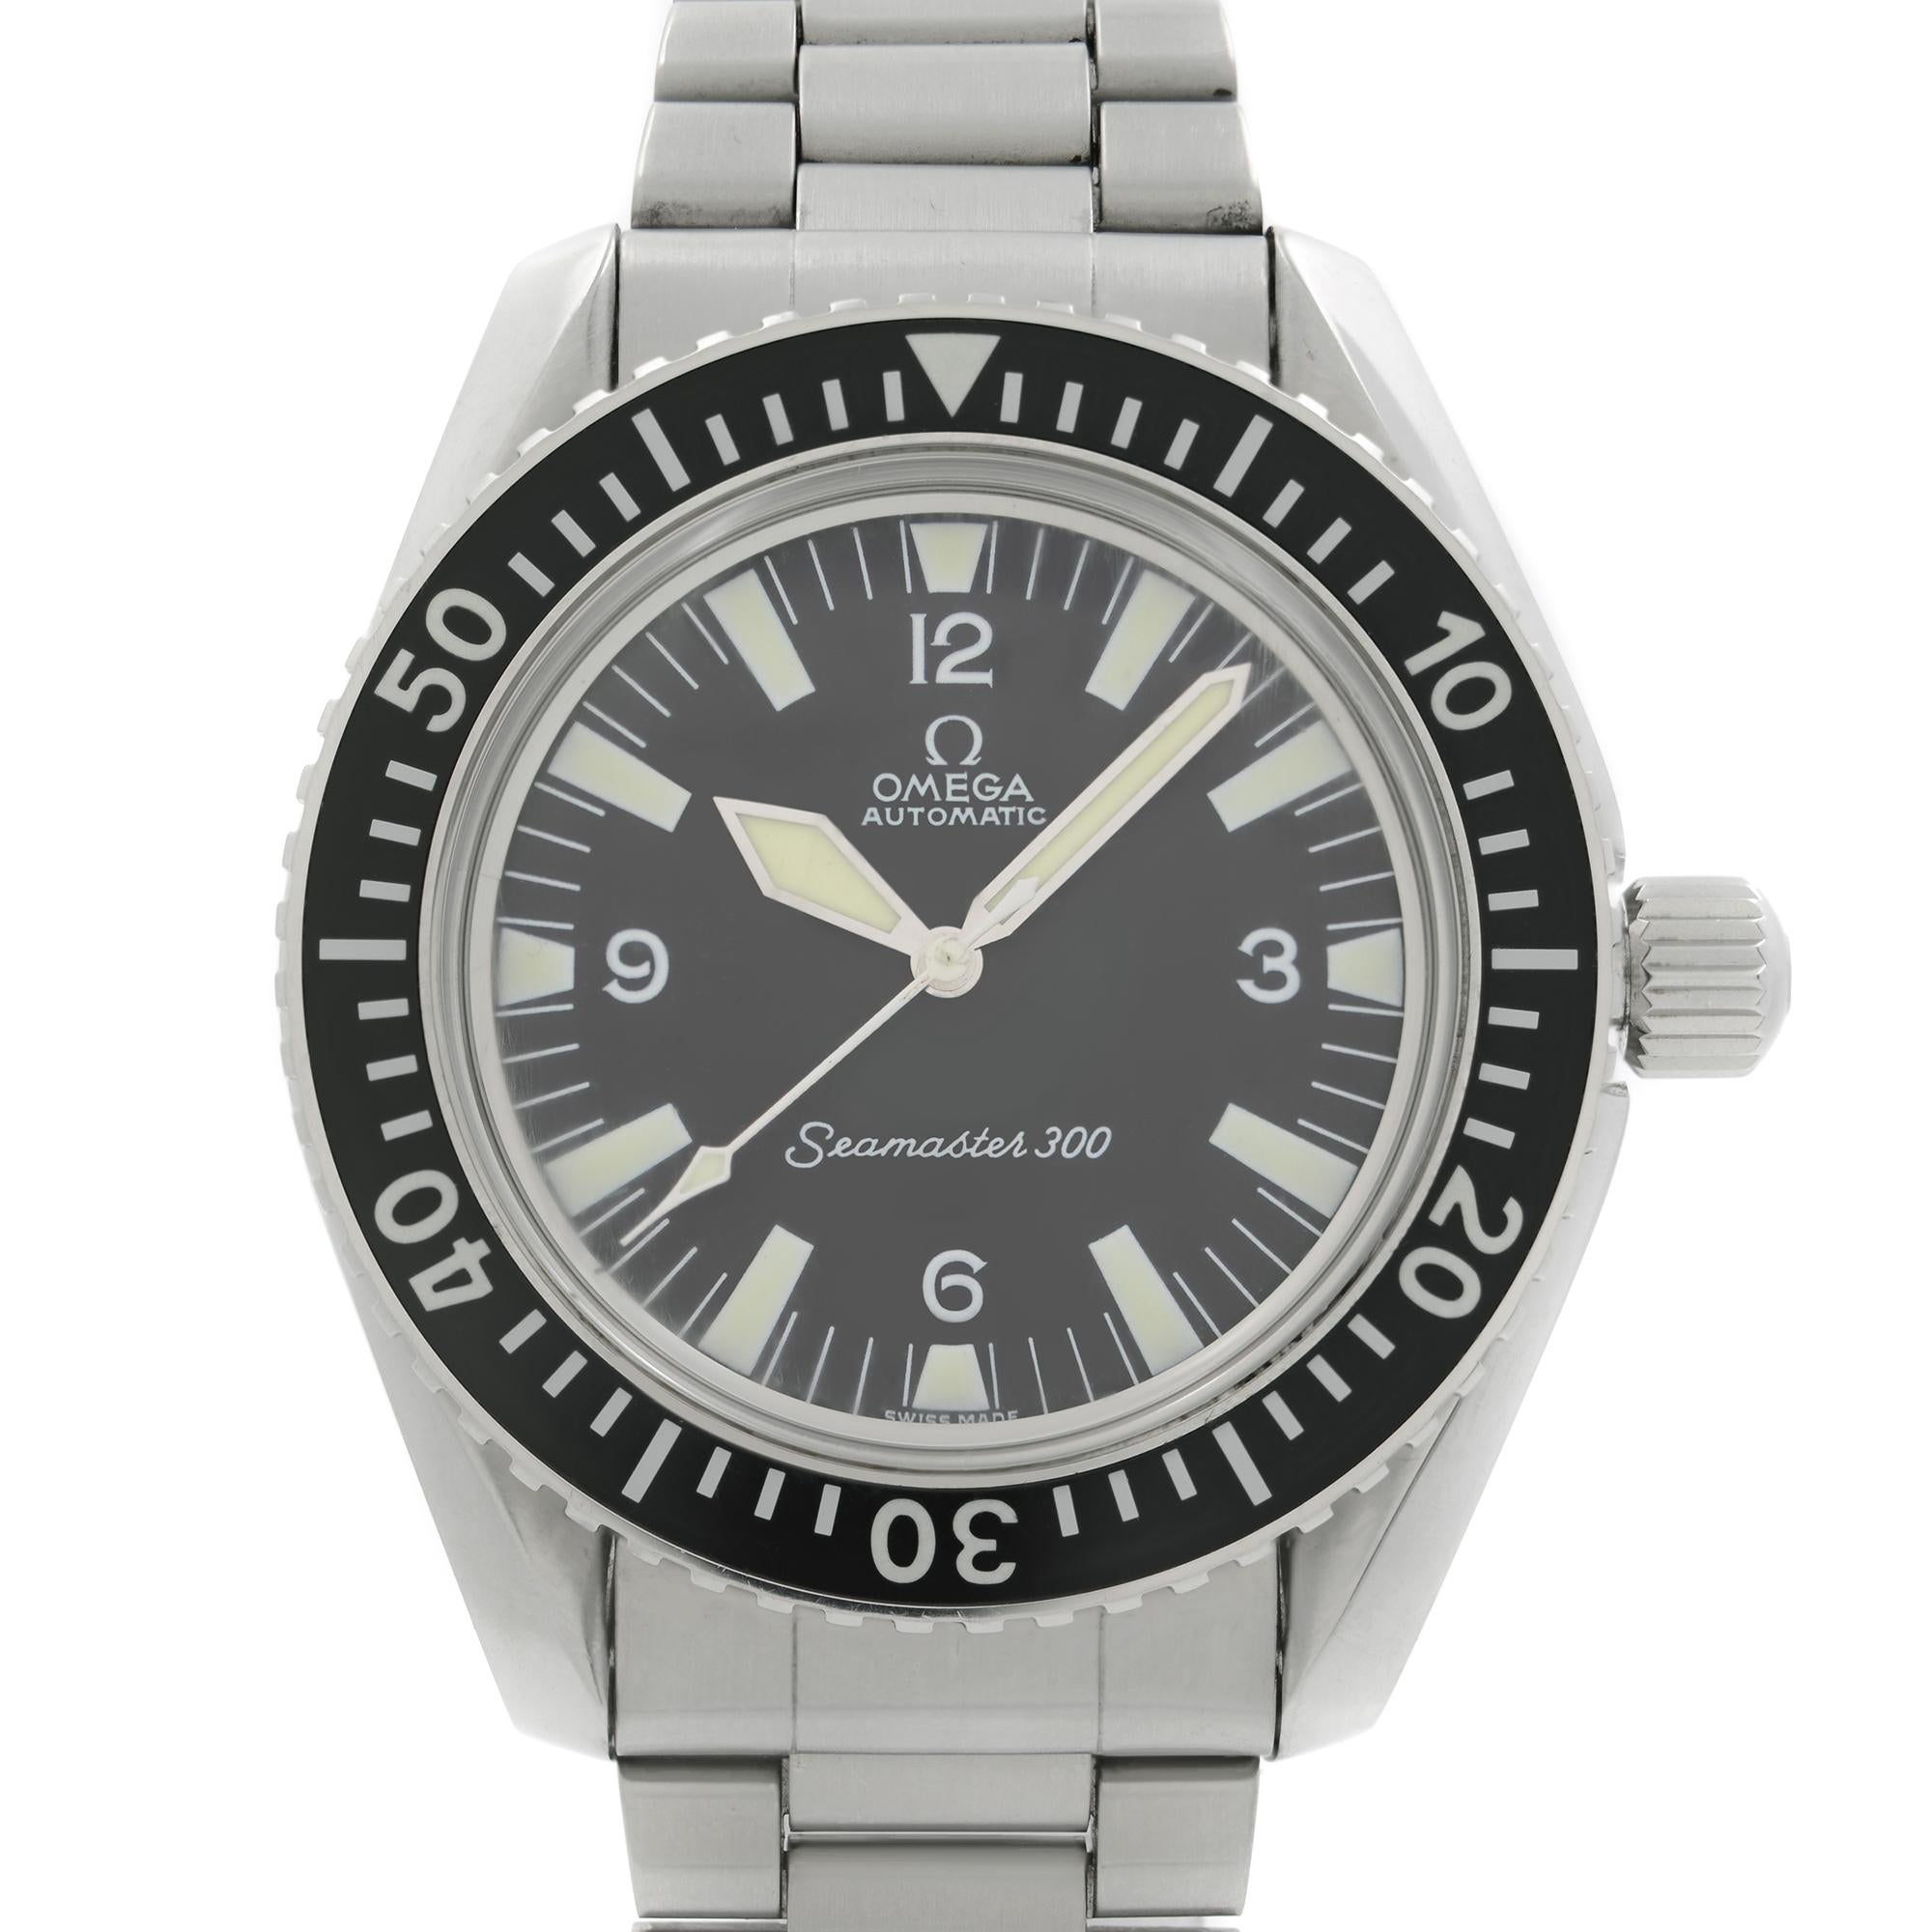 Pre-owned Vintage Omega Seamaster Stainless Steel Black Dial Automatic Mens Watch. Aftermarket Stainless Steel Band. The Black Bezel Insert and the Crystal Shows Minor Scratches. This Beautiful Timepiece is a Bonafide Diver's Watch with Ties to